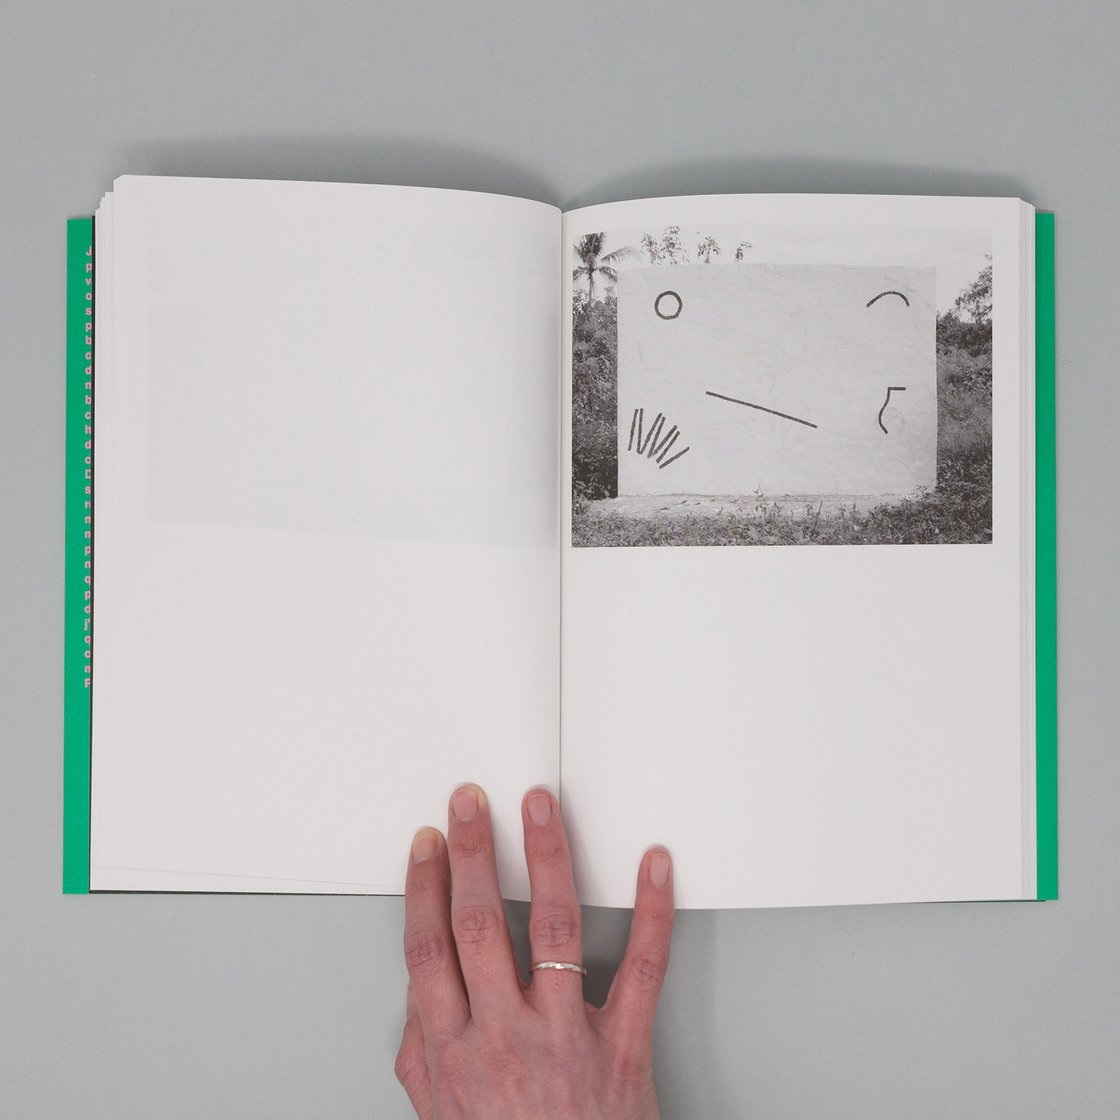 Image of Building a wall — a book by Roméo Julien